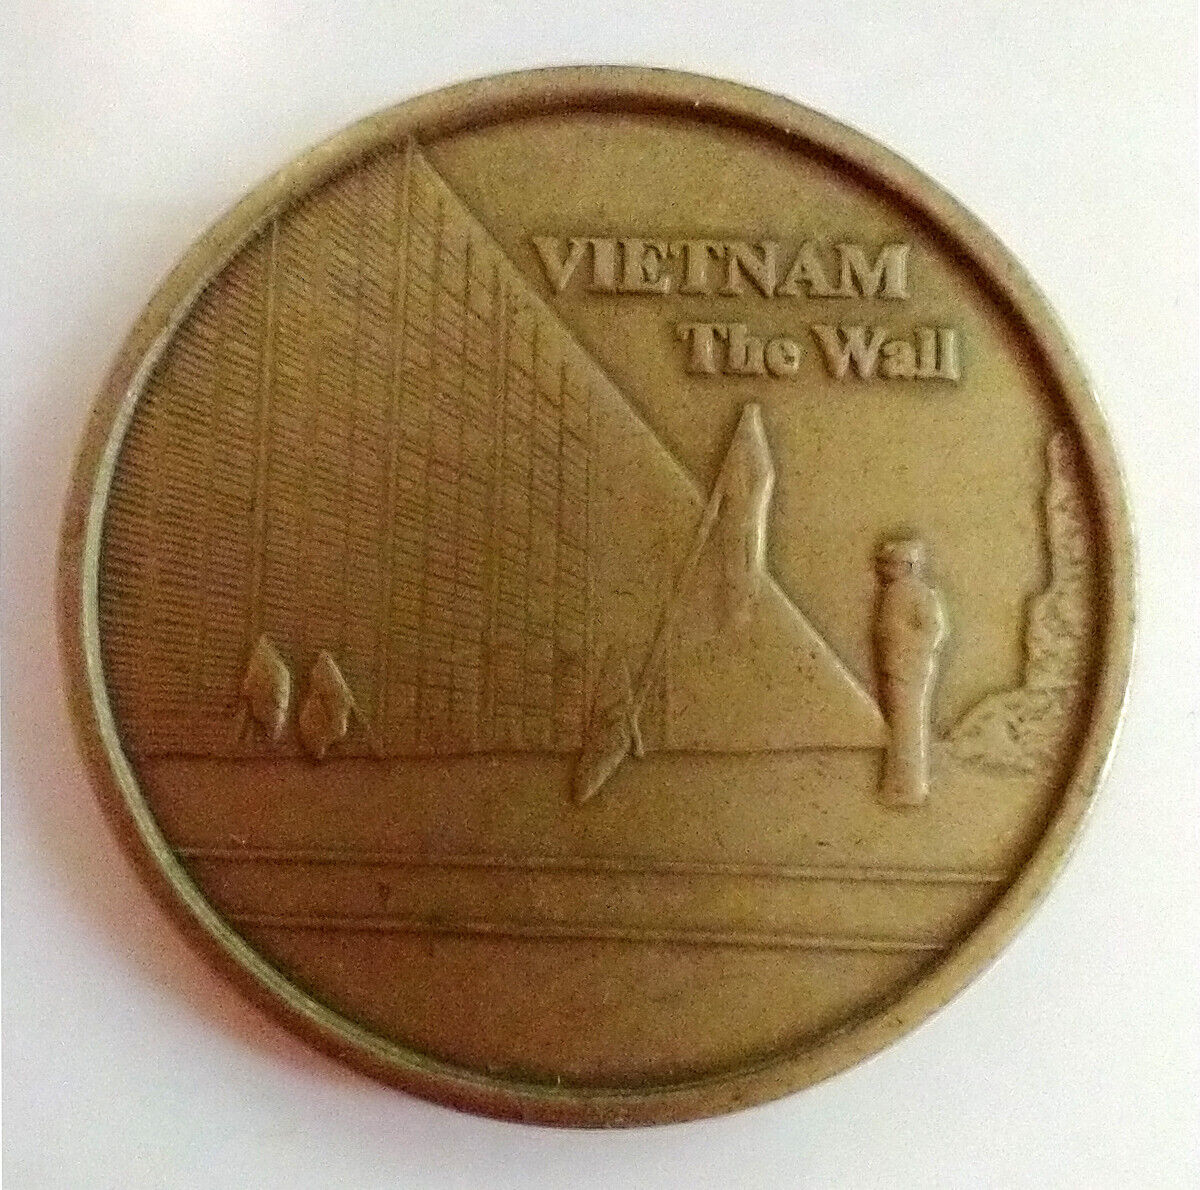 U.S. AMERICAN LEGION VIETNAM THE WALL OF VETERANS LIMITED EDITION CHALLENGE COIN